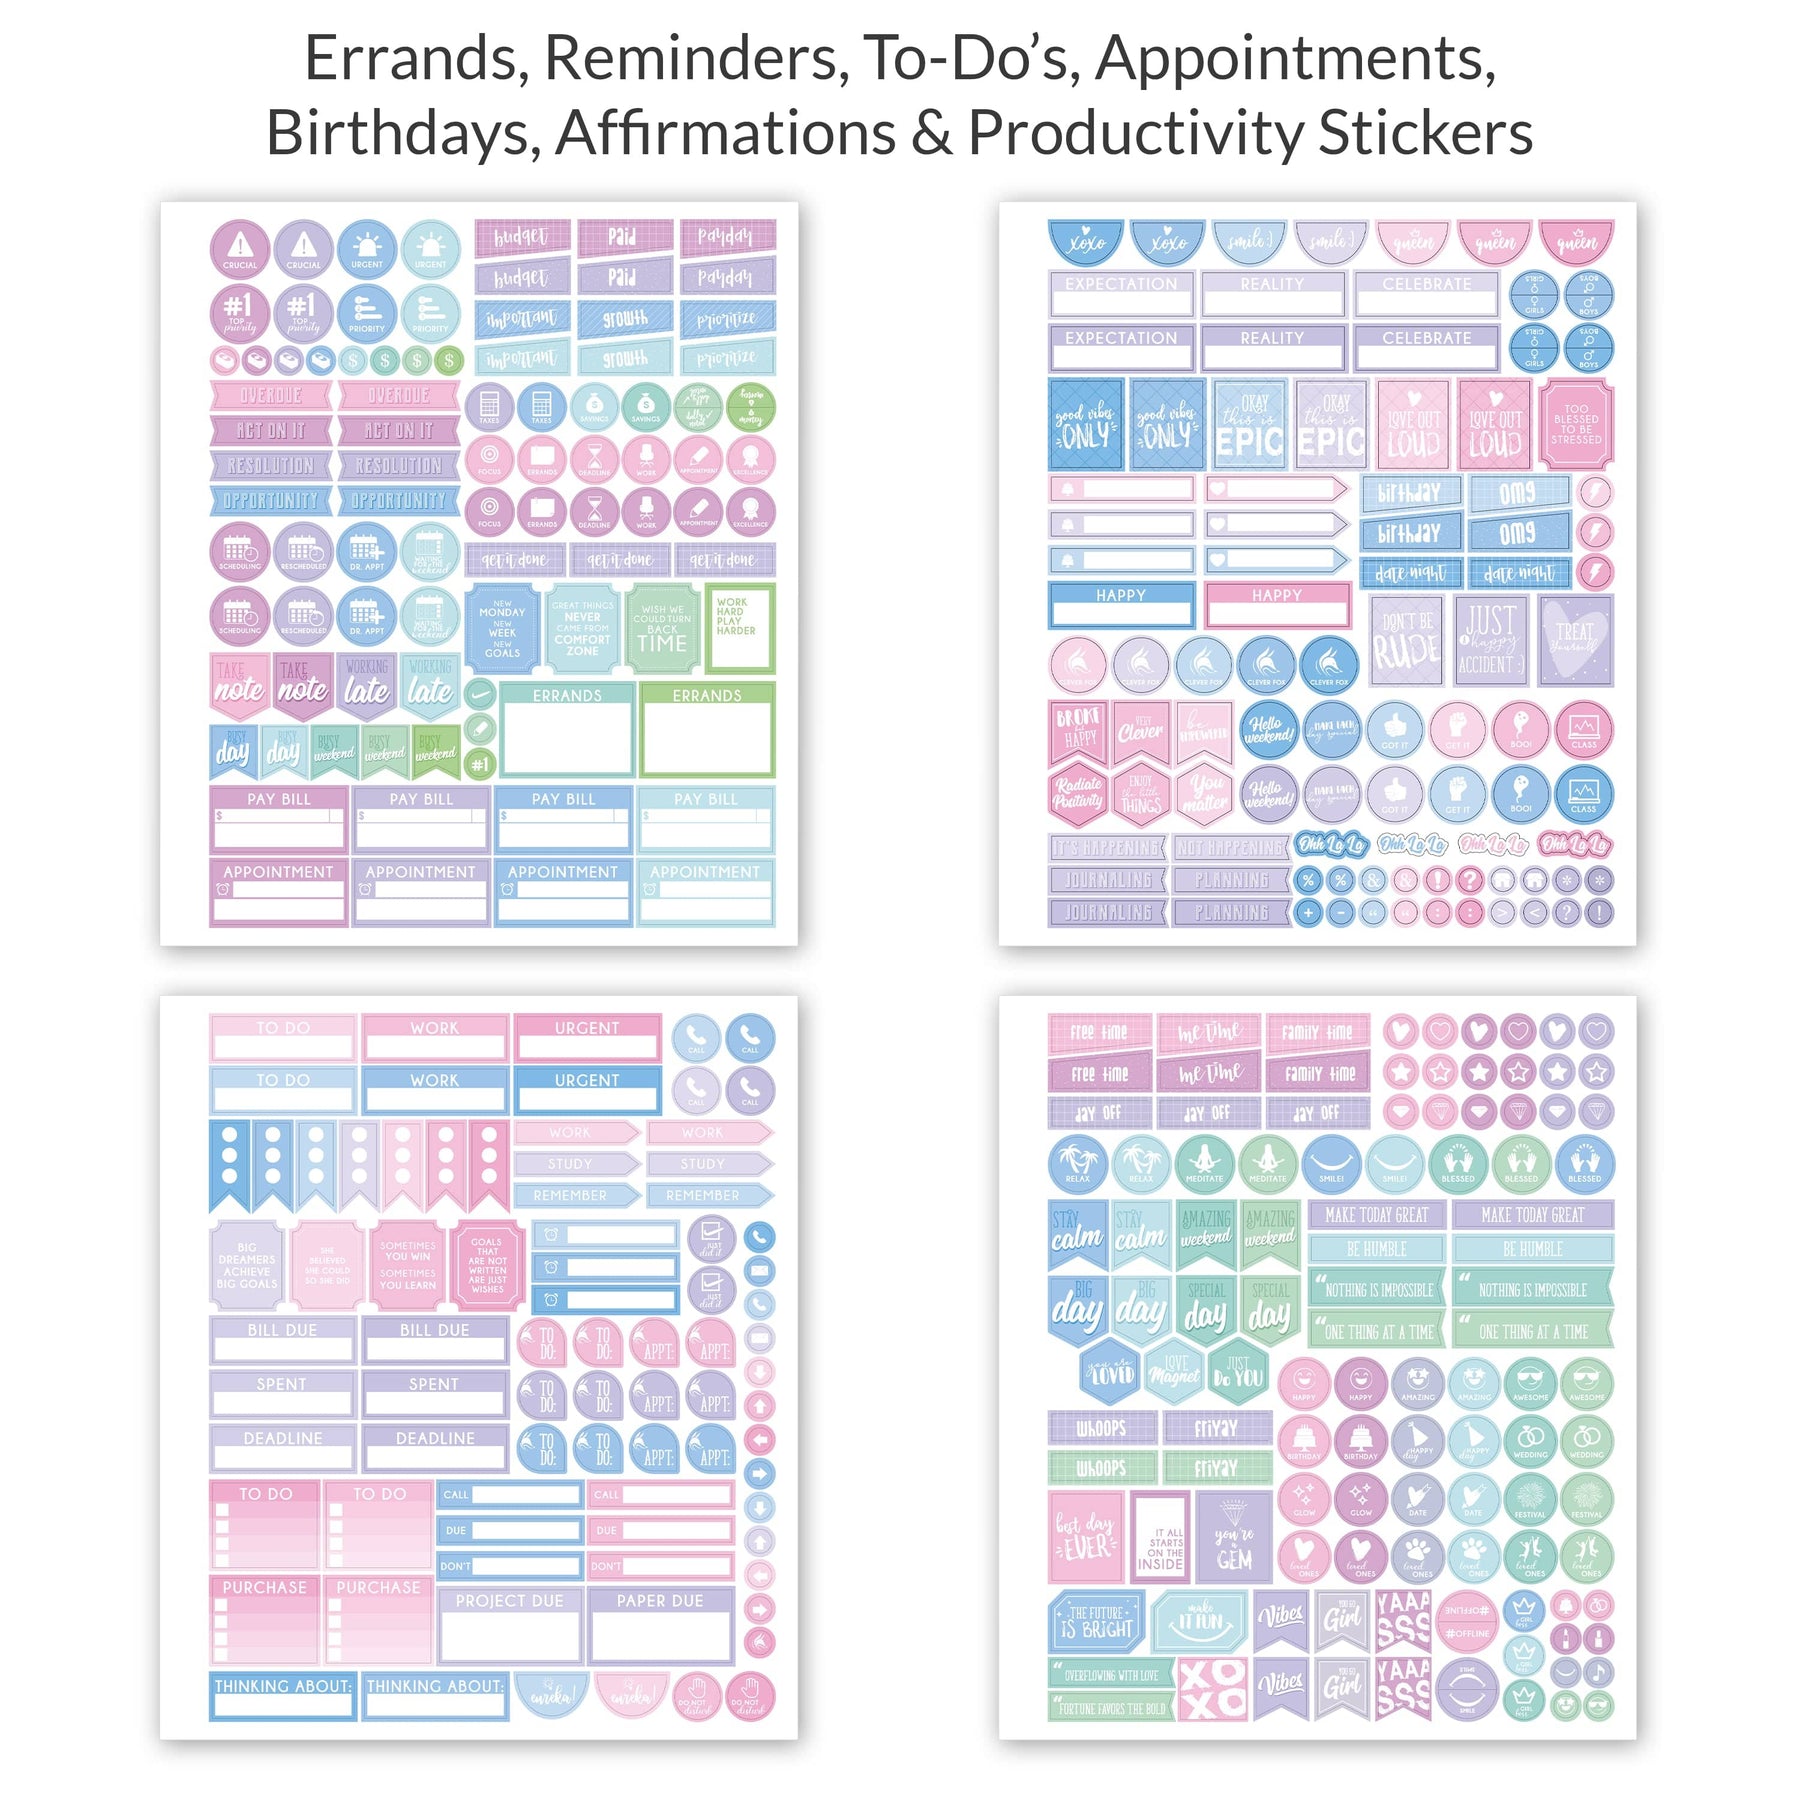 Study Student Planner Stickers - School Stickers - Appointment